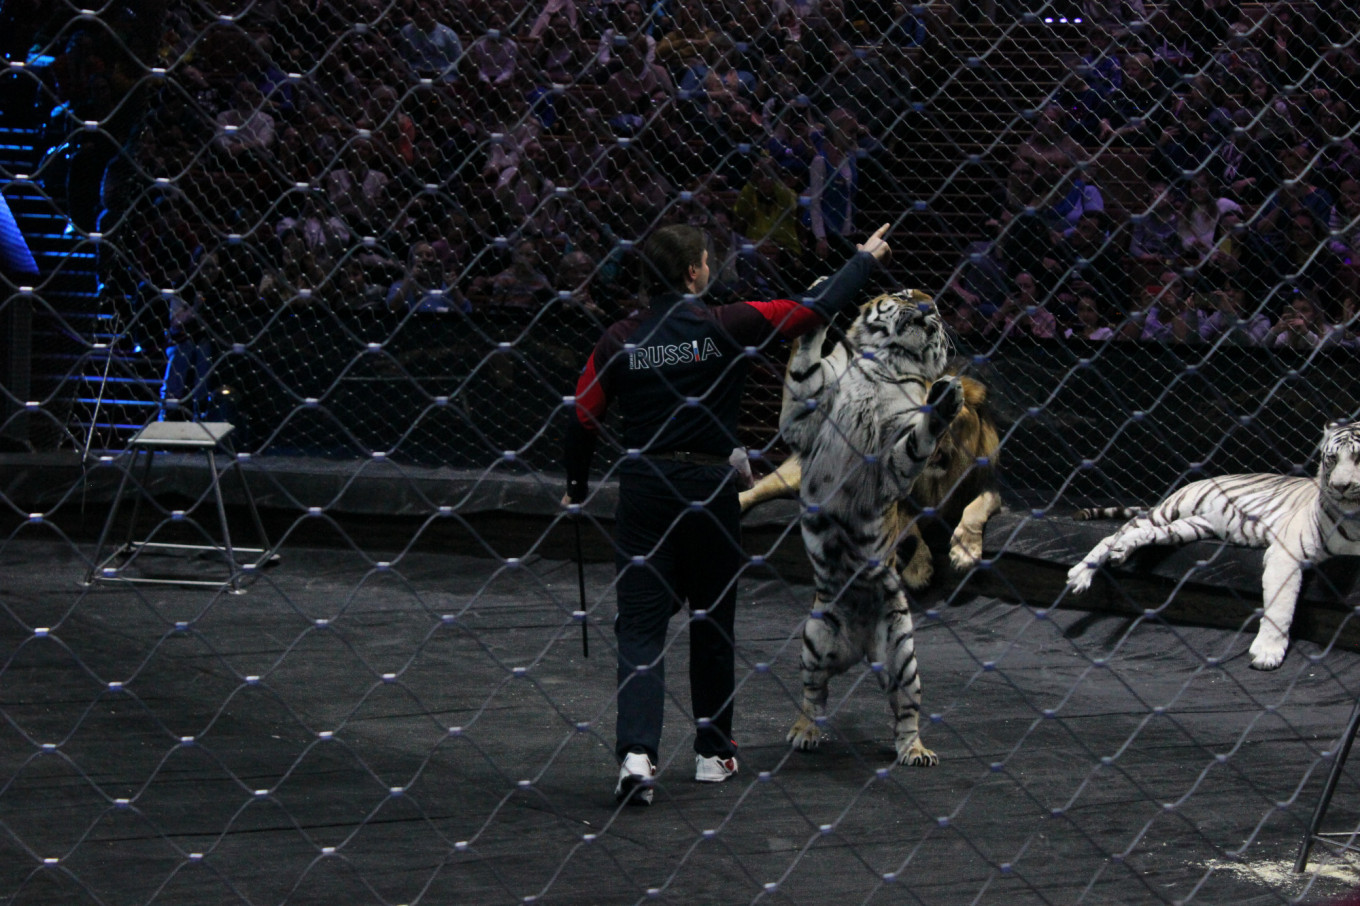 Russian Circuses Face Calls to Ban Performing Animals - The Moscow Times